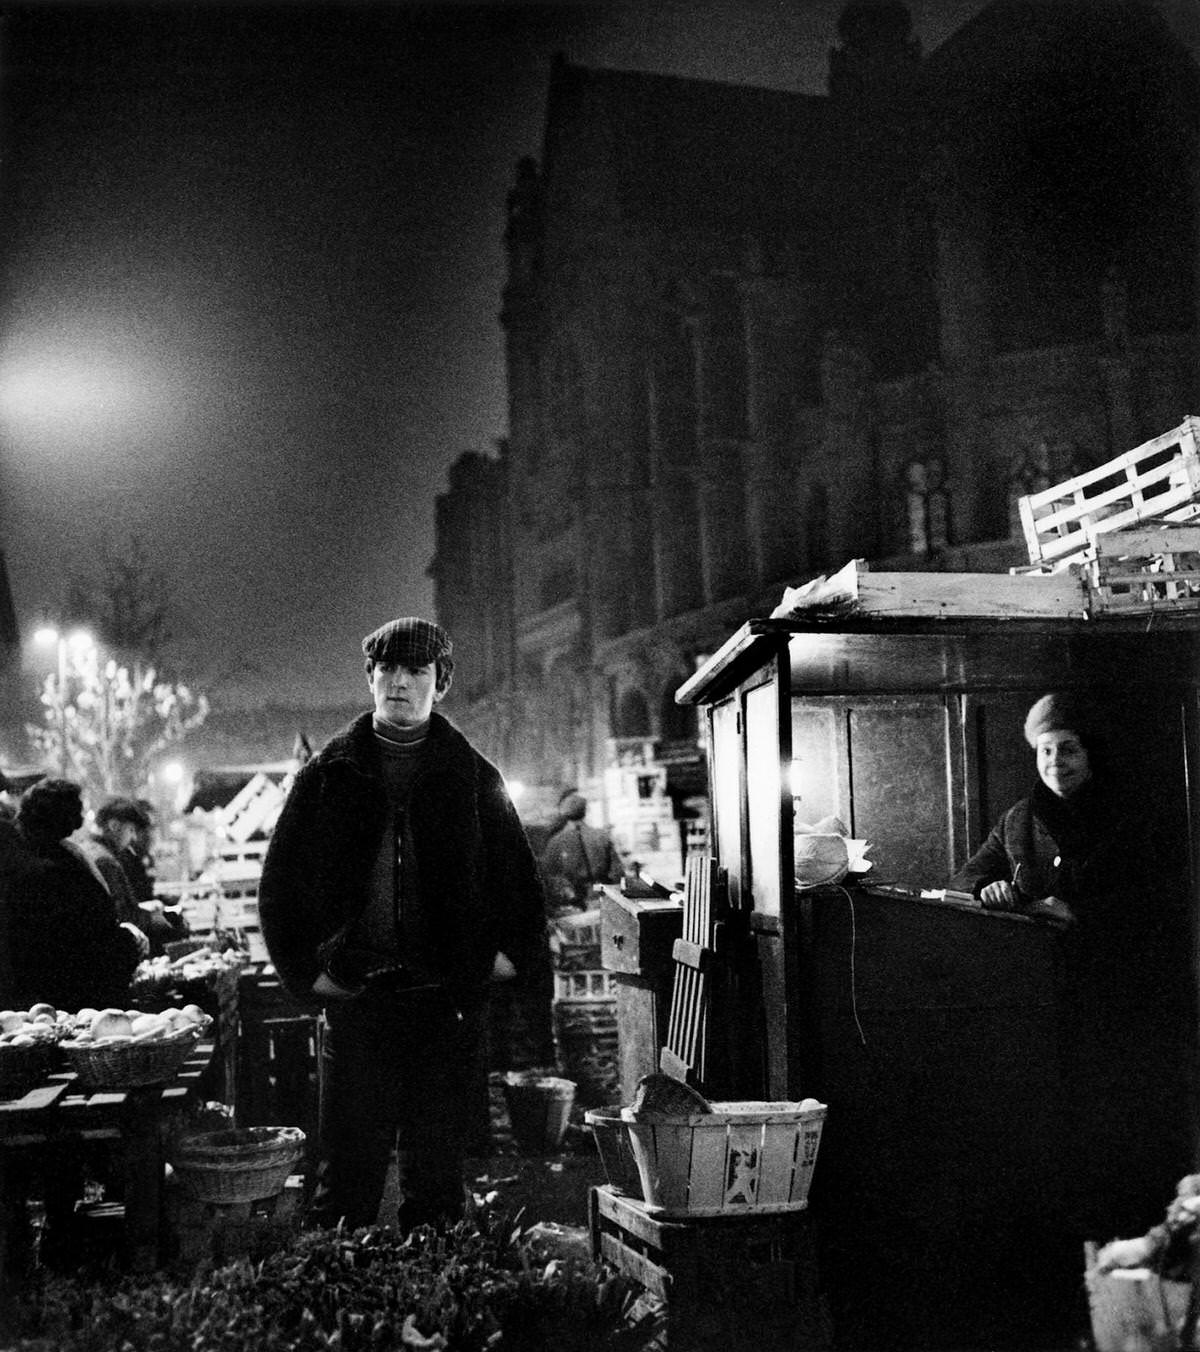 At night in Les Halles on October, 1968 in Paris